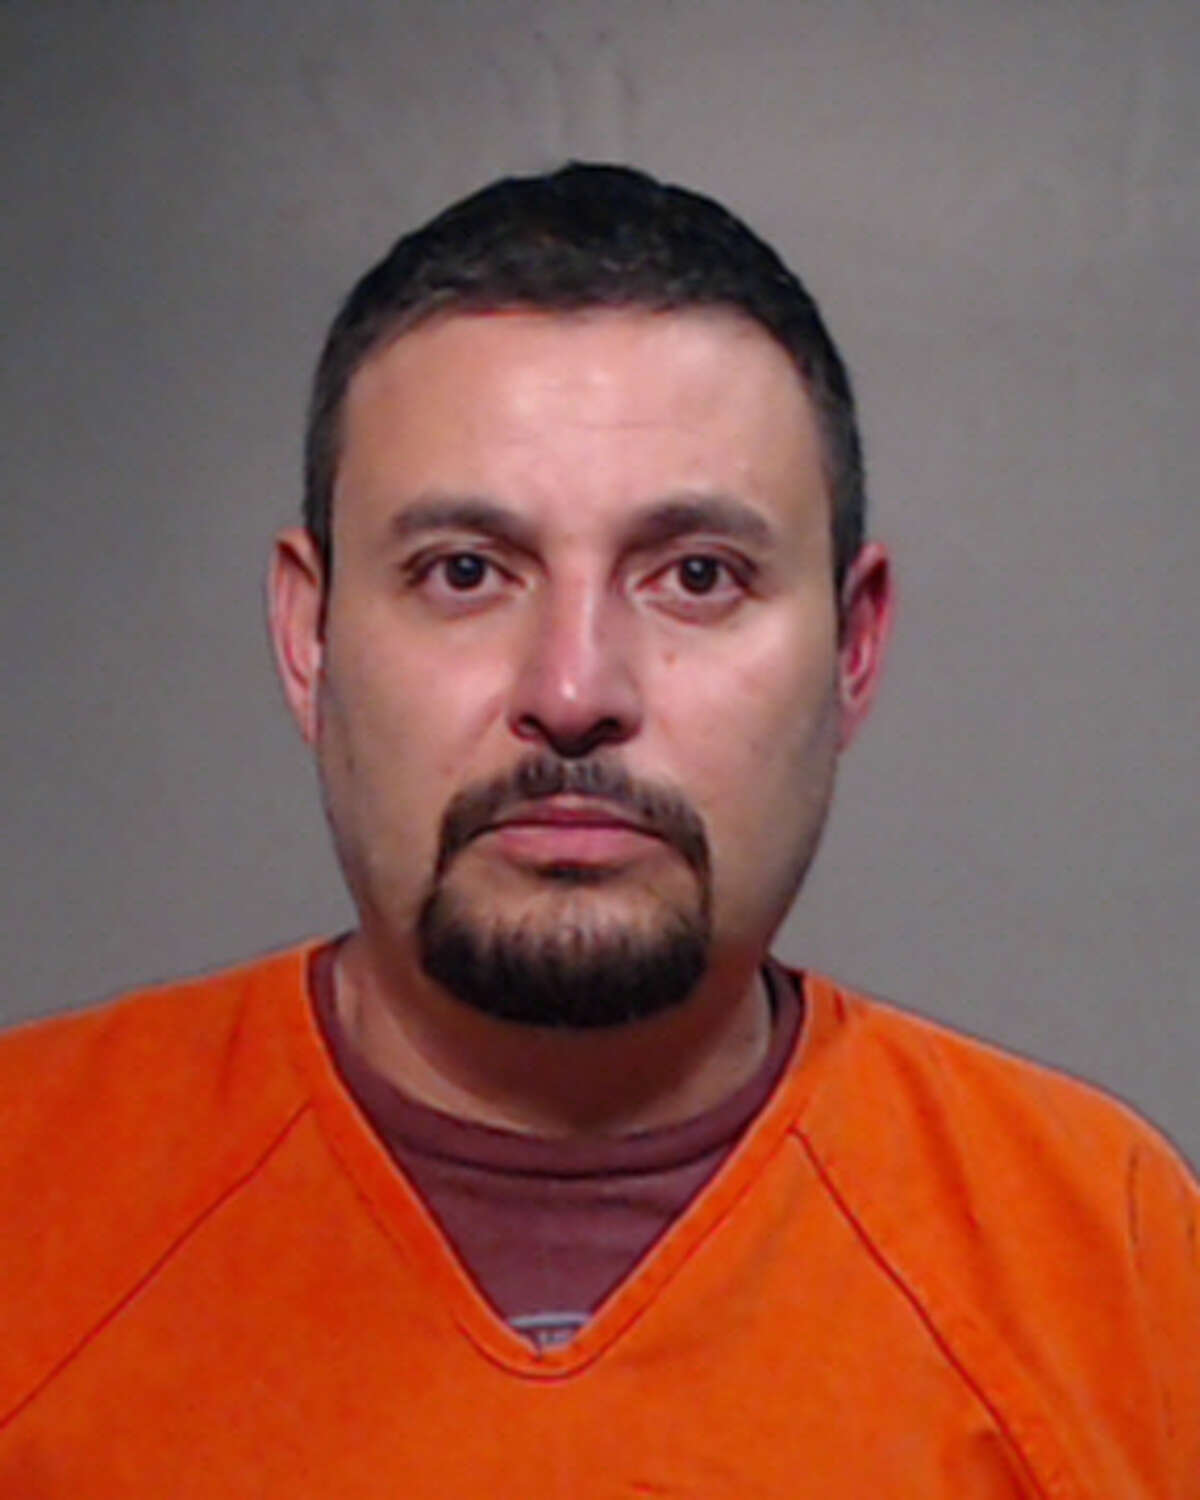 Juan Barrios was arrested June 25, 2017 near McAllen and charged with trademark counterfeiting.